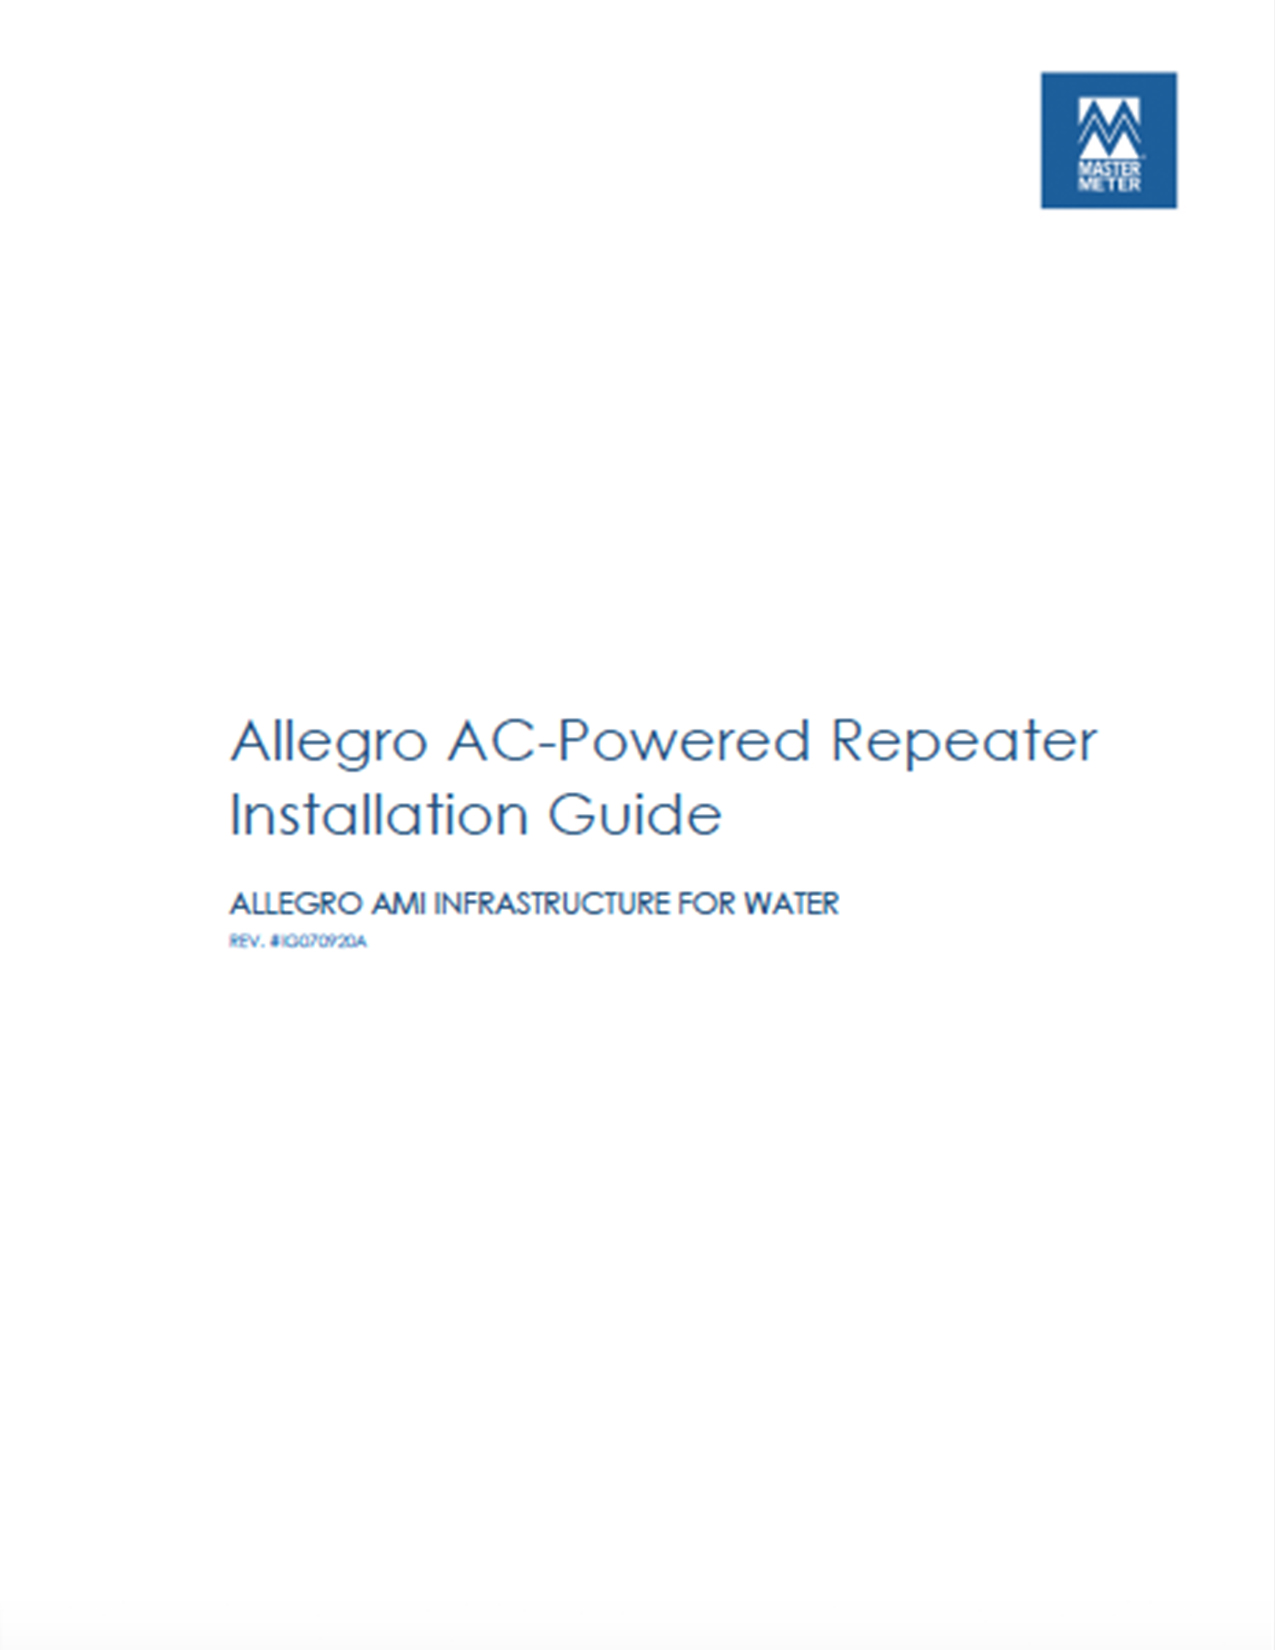 Allegro AC-Powered Repeater Installation Guide